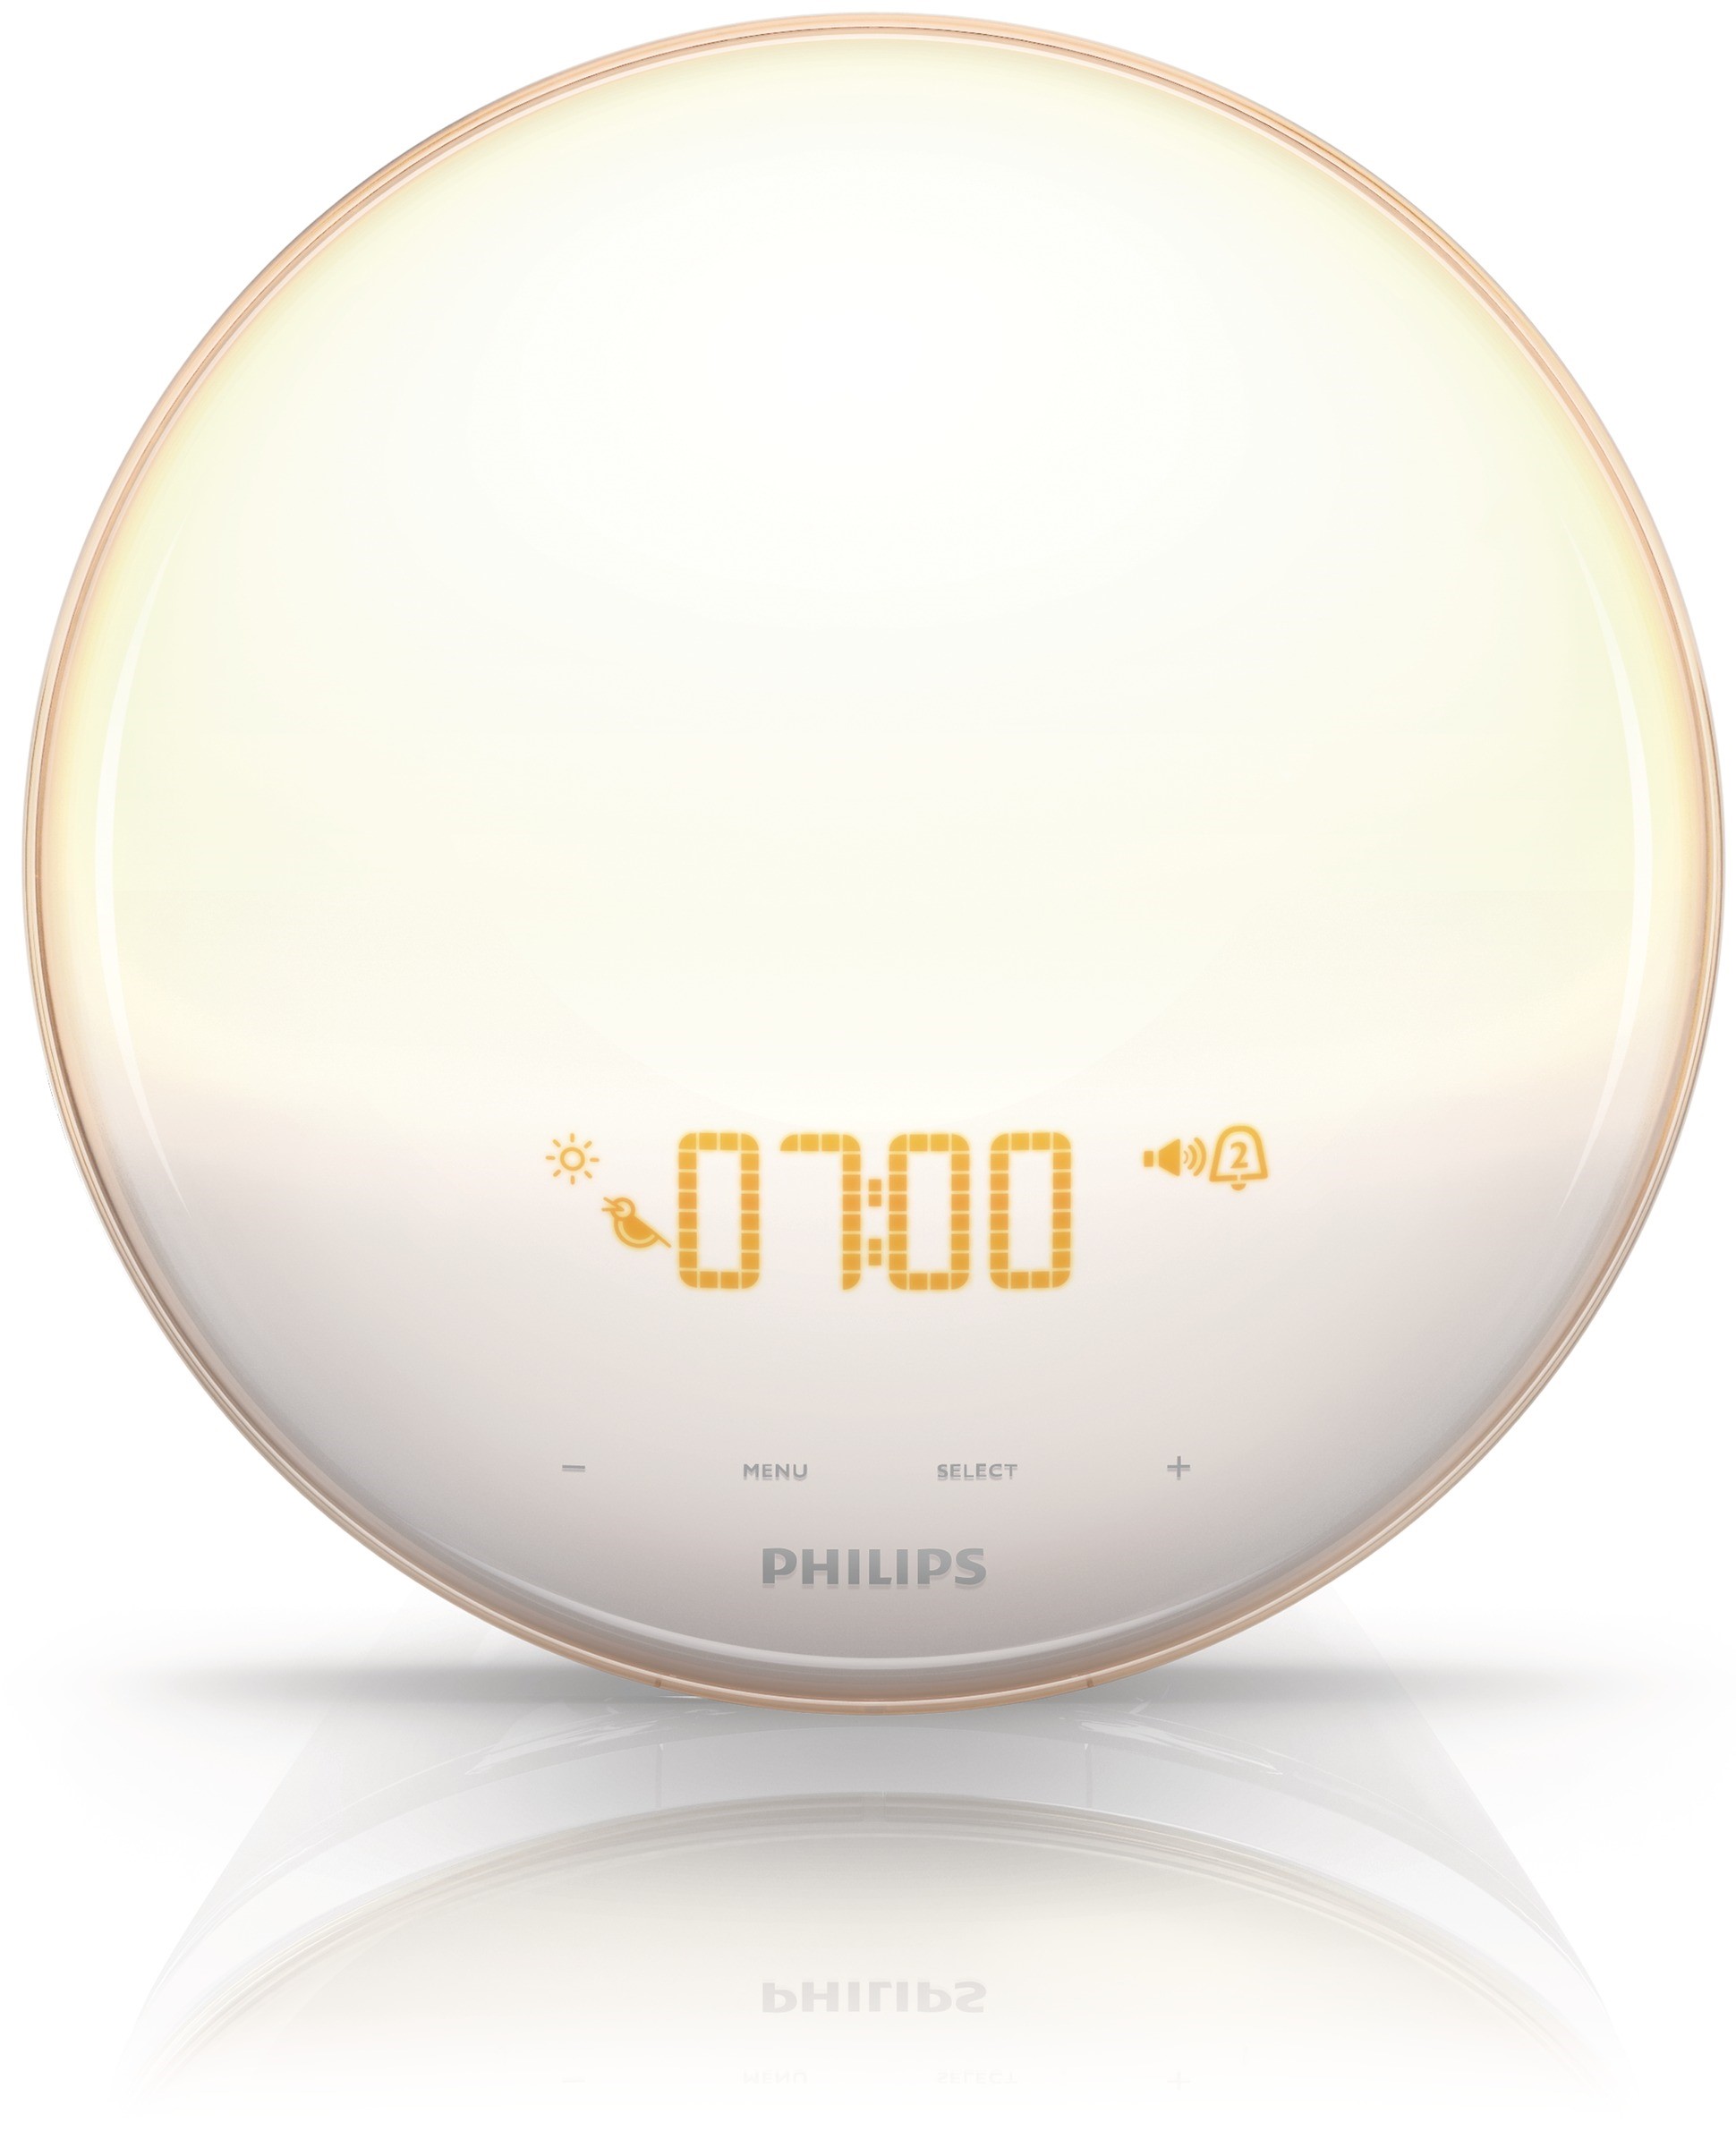 Philips Wake-up Light with Colored Sunrise, Sunset Simulation and New PowerBackUp+ Feature, HF3520/60 - image 1 of 16